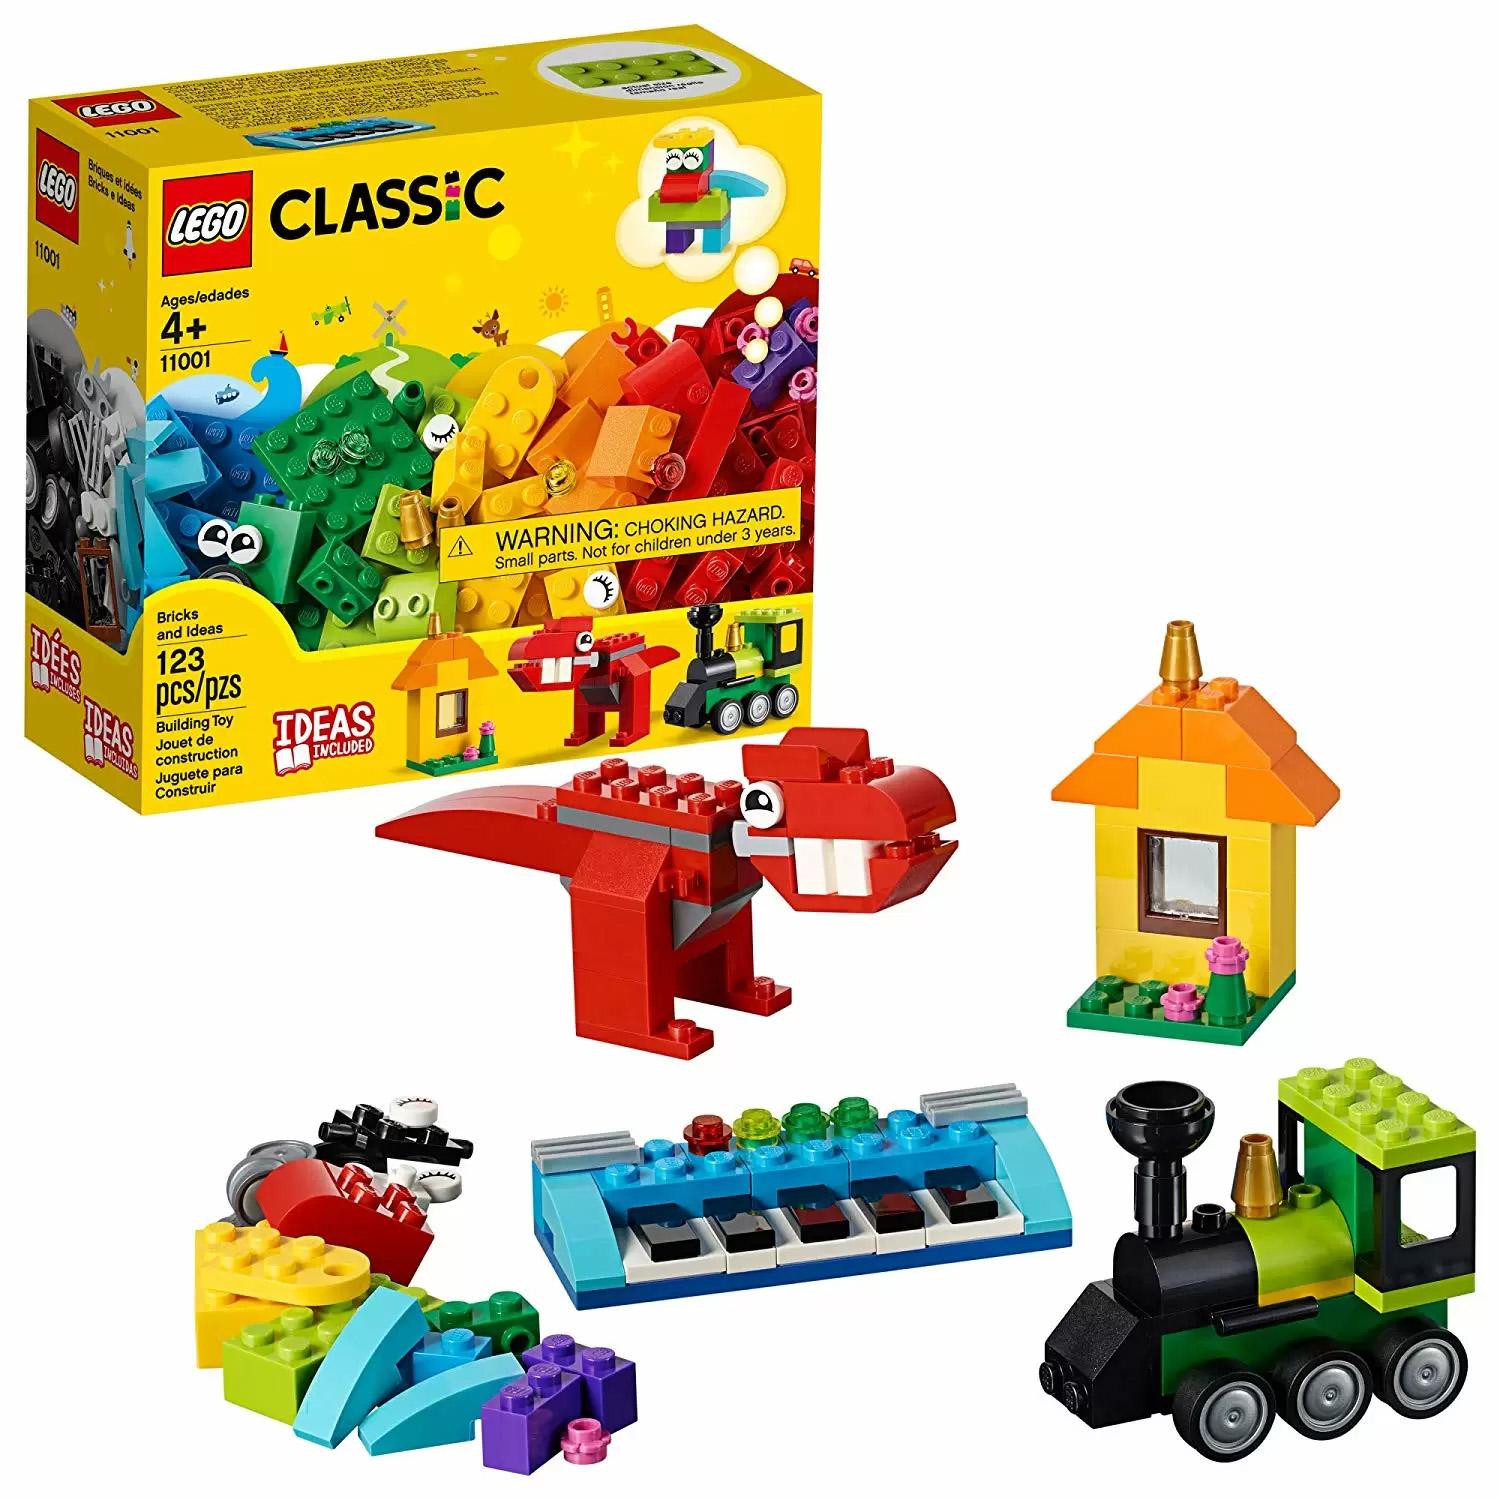 LEGO Classic Bricks and Ideas 11001 Building Kit for $6.09